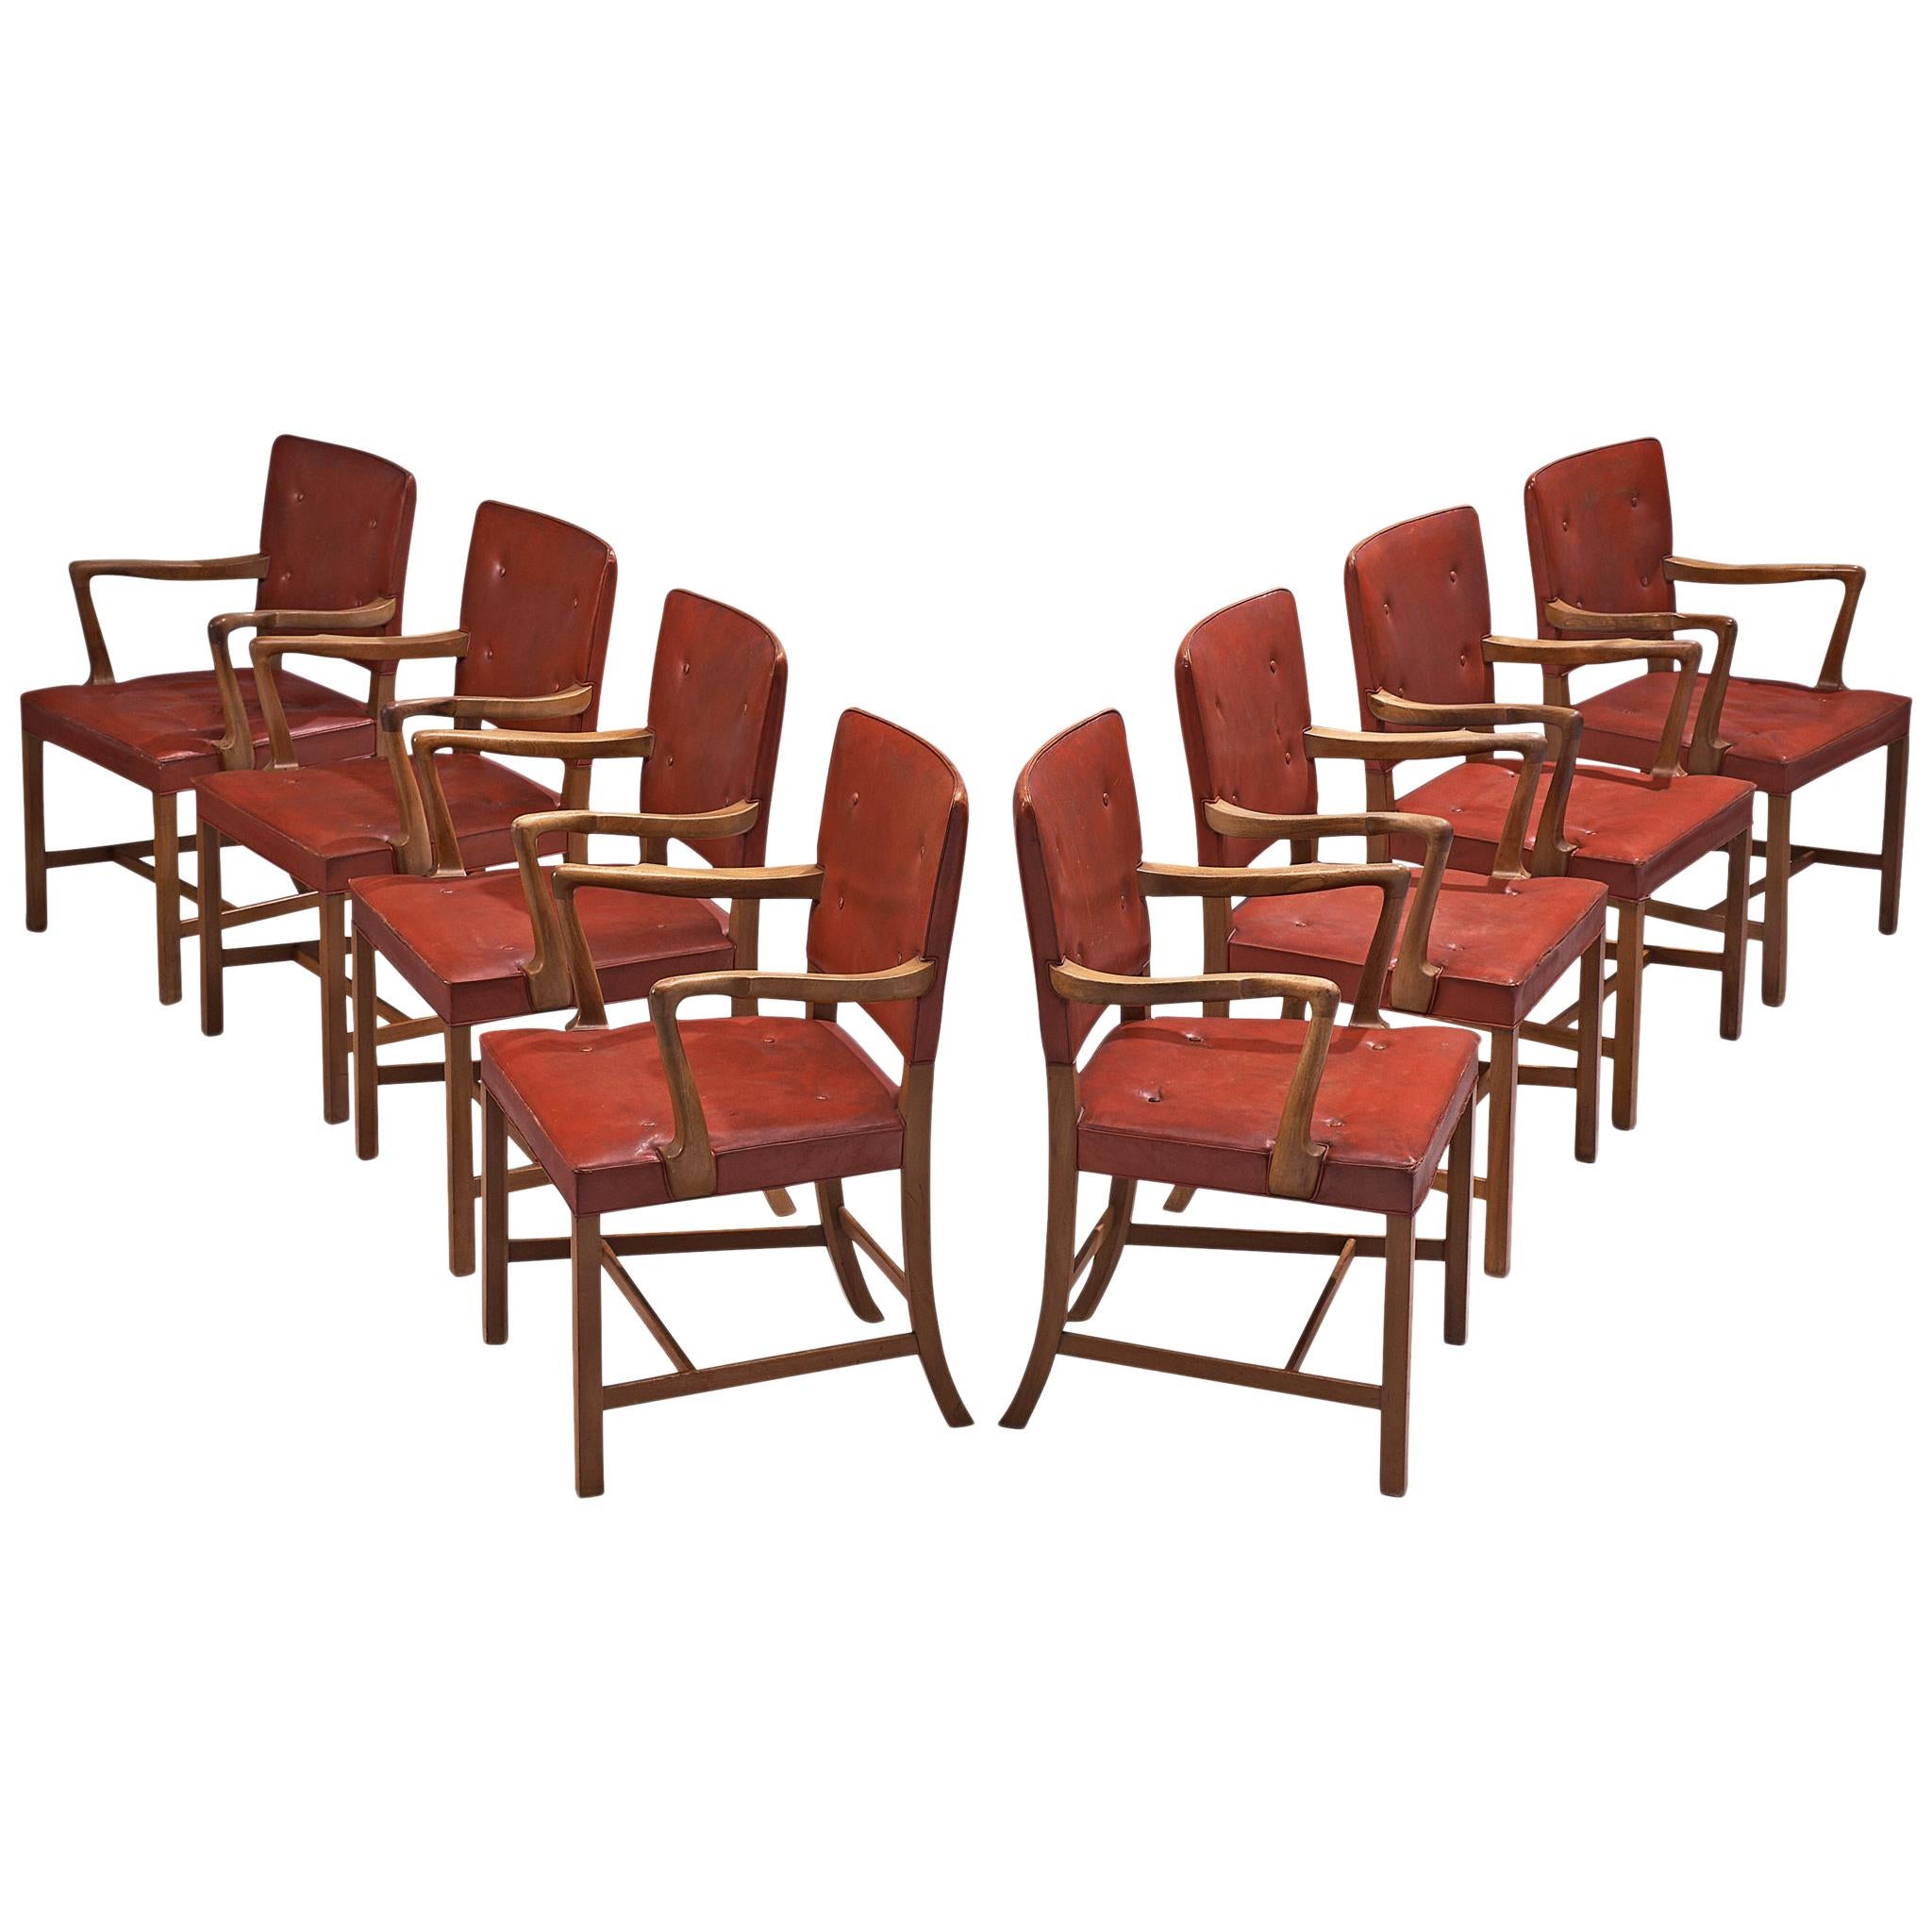 Set of 8 Armchairs in Original Red Leather by Ole Wanscher